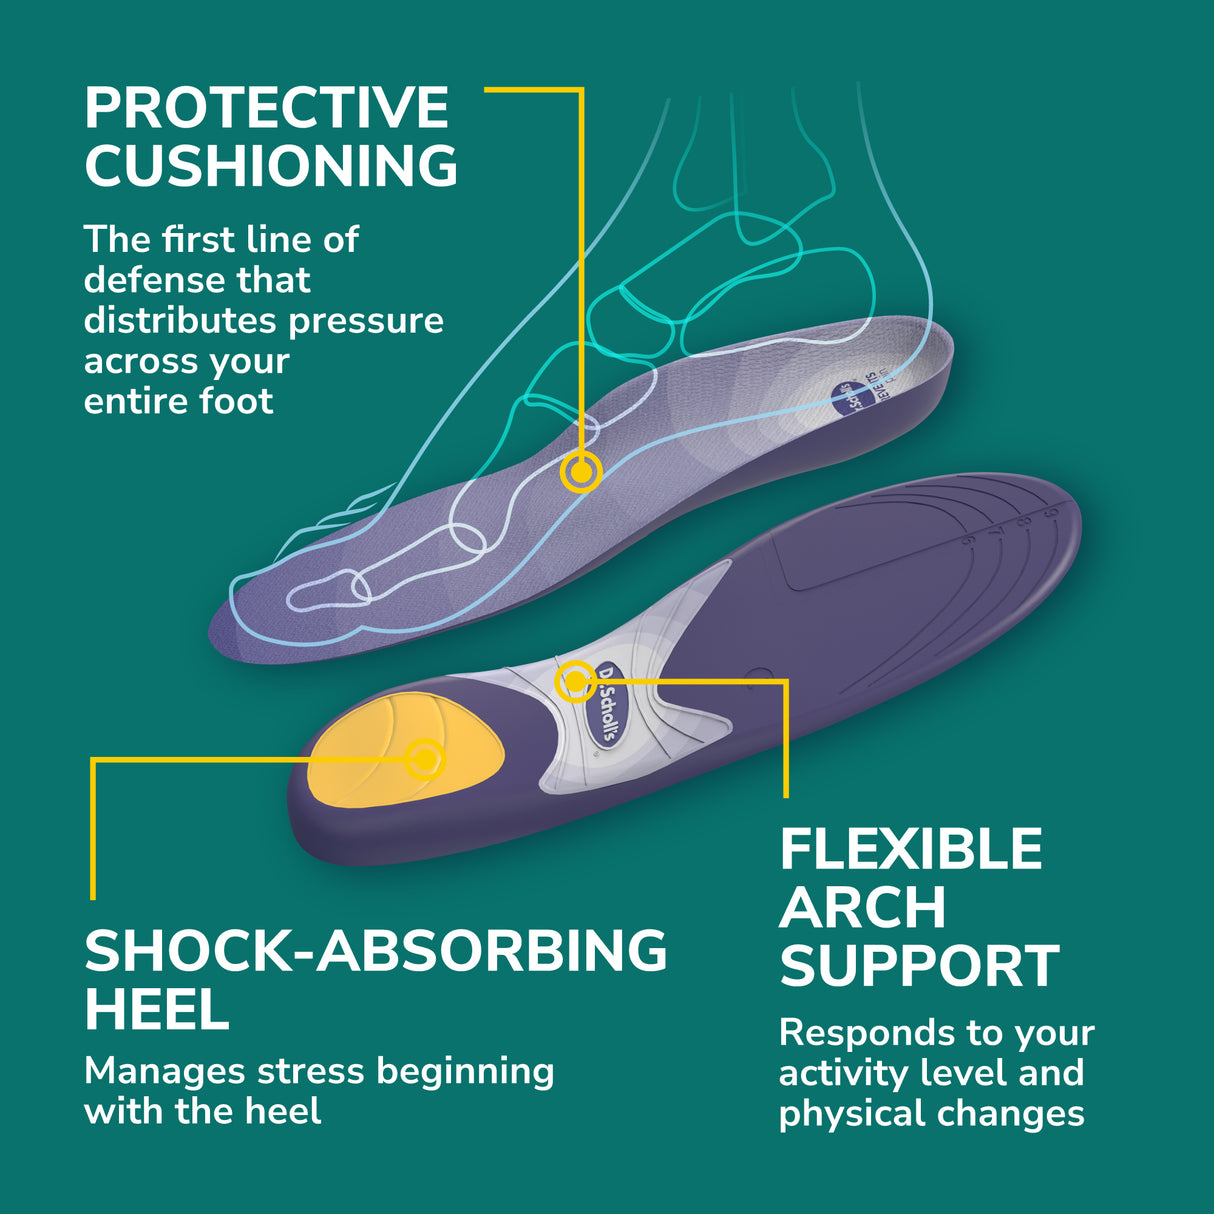 image of protective cushioning flexible arch support and shock absorbing heel